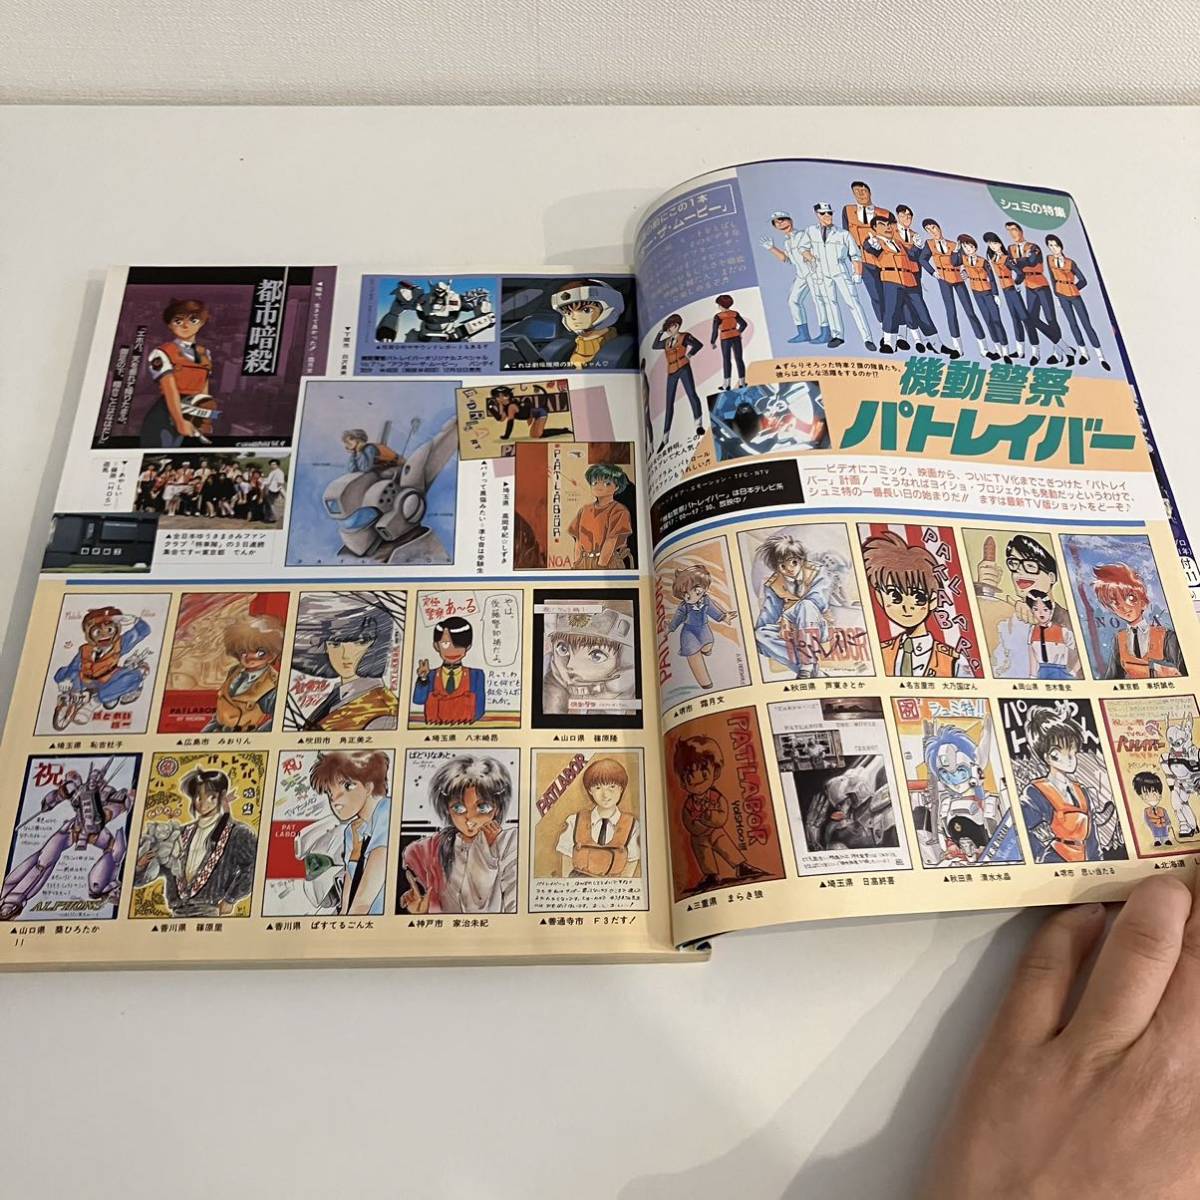 230330[ pin nap attaching ] Fanroad 1989 year 12 month number * Mobile Police Patlabor world SF convention * retro anime game that time thing magazine manga SF